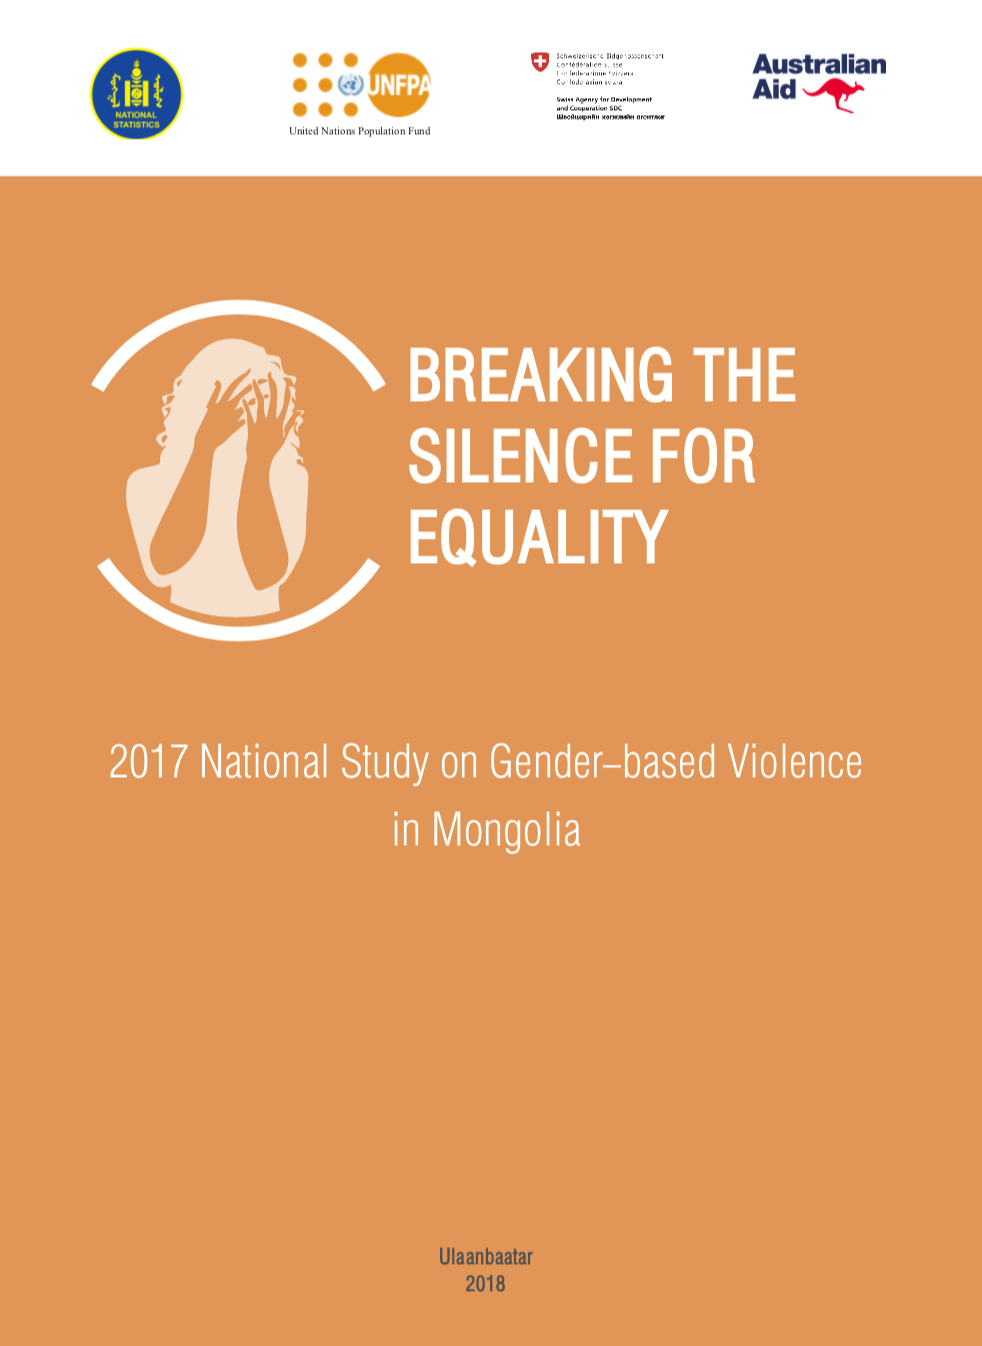 Breaking the silence for equality: 2017 National Study on Gender-based Violence in Mongolia